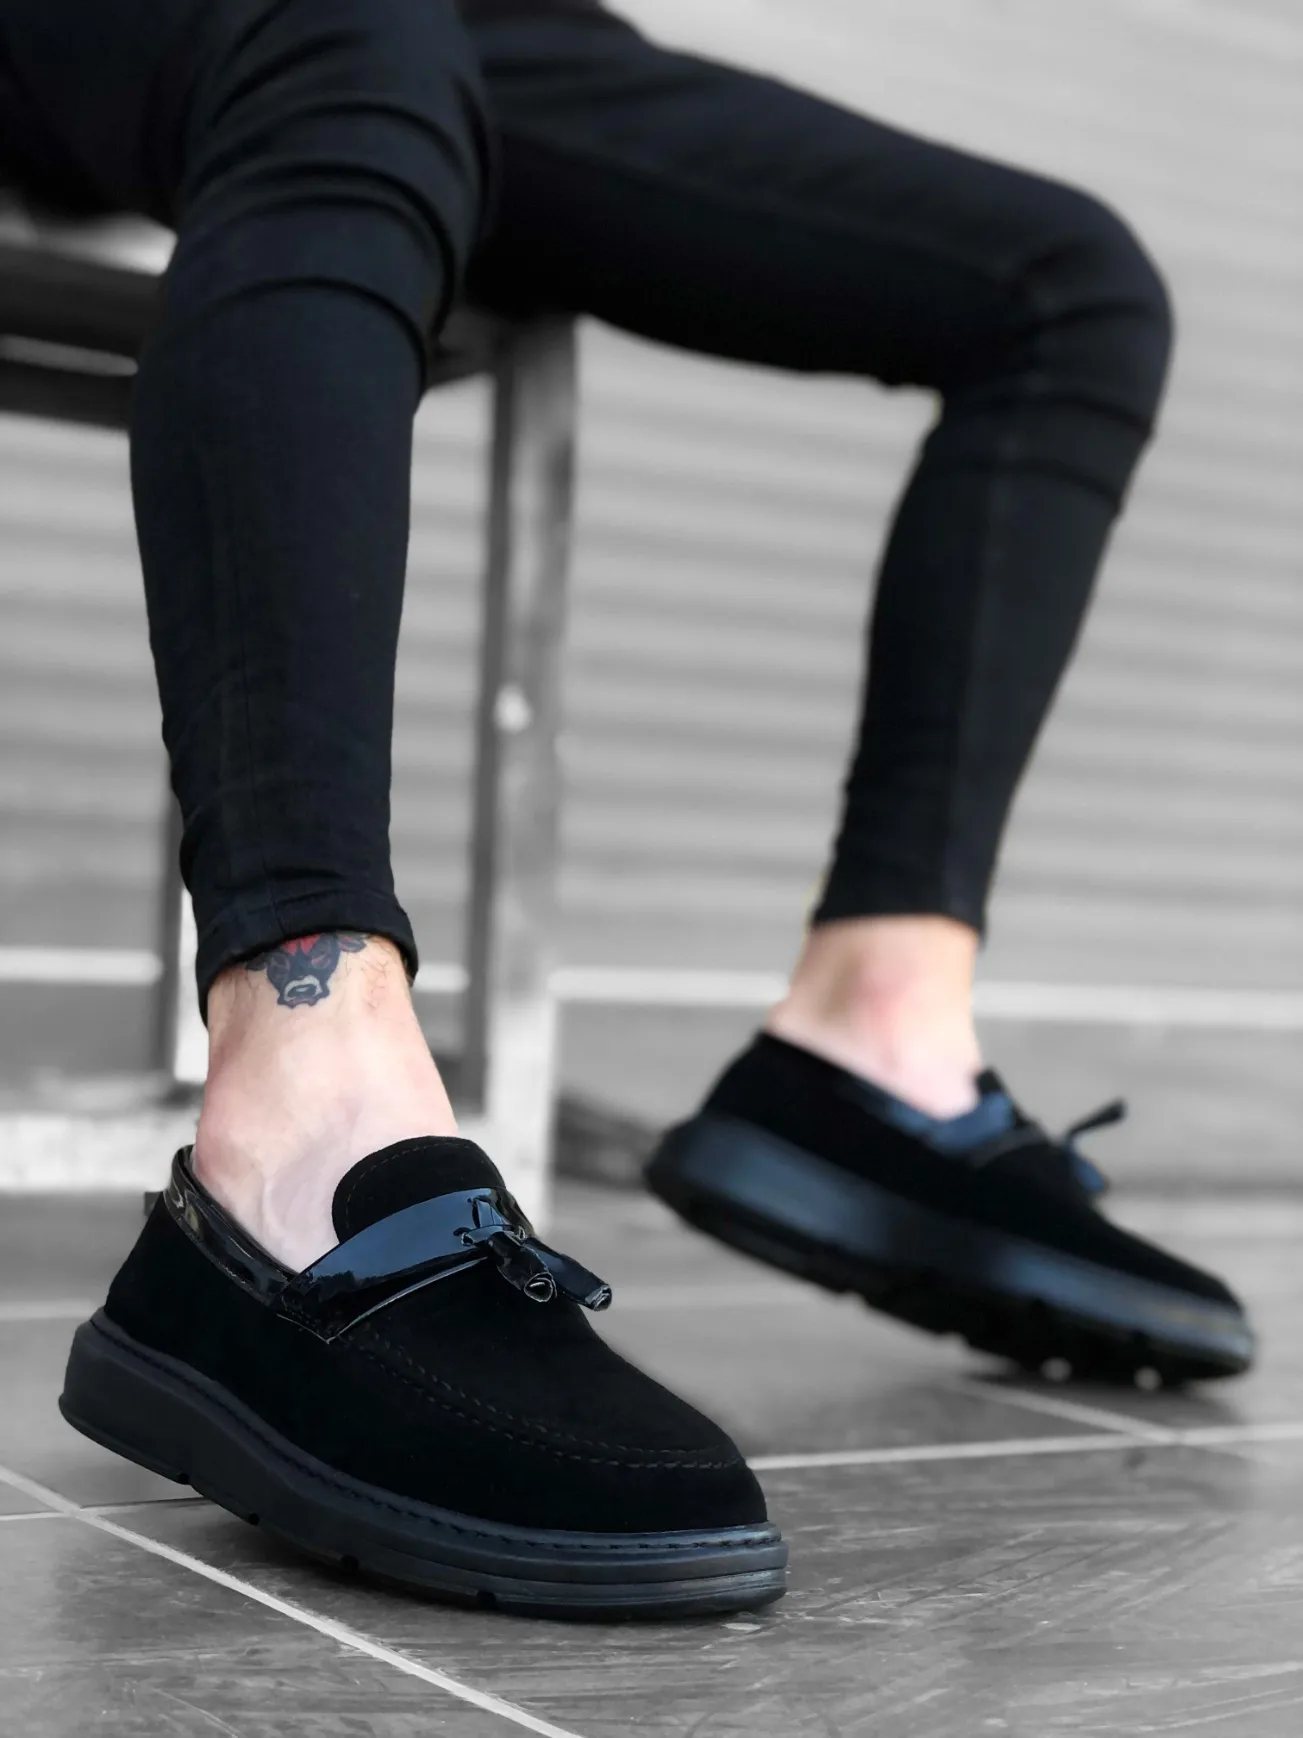 

Men's Sports Shoes New Season Daily High Sole White Luxury Brand Trendy Genuine Leather Comfortable Lightweight Walking Tennis Zapatillas Ho BA0005 Bağcıksız High Sole Classic Black Suede Shiny Belted Tassels Men Shoes